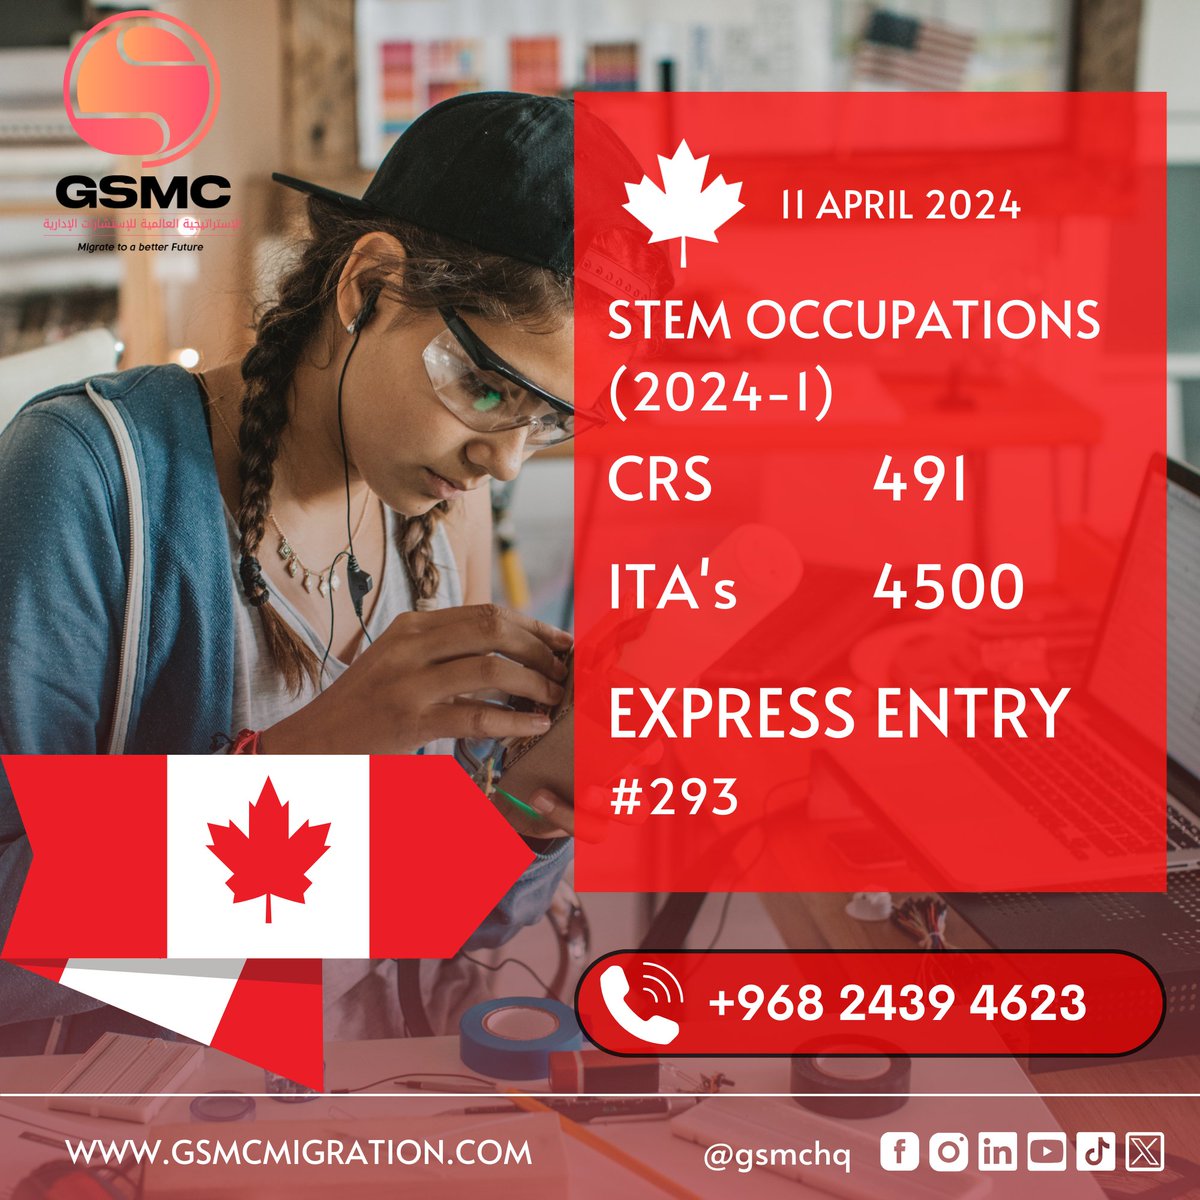 Breaking News: ITA's issued with CRS scores 491 in the latest Express Entry draw focused on STEM occupations! A total of 4500 candidates invited on April 11, 2024.

Apply Now!
wa.me/96824394623

#GSMC #workandliveabroad #migrateabroad #ExpressEntry #expressentrydraw